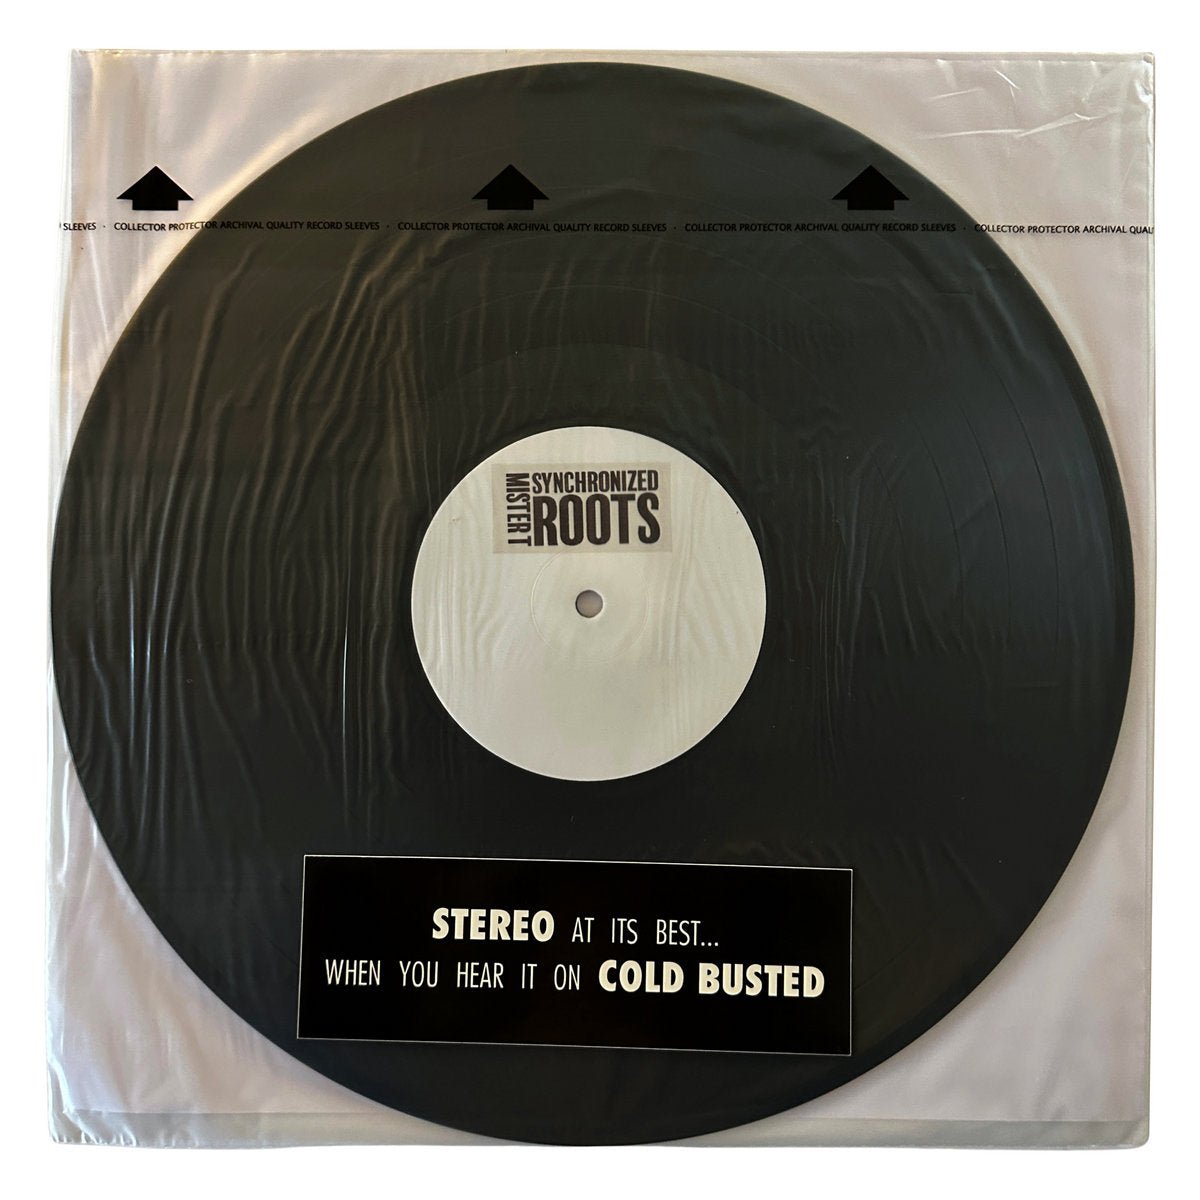 Mister T. - Synchronized Roots - Limited Edition 12 Inch Vinyl Test Pressing - Cold Busted